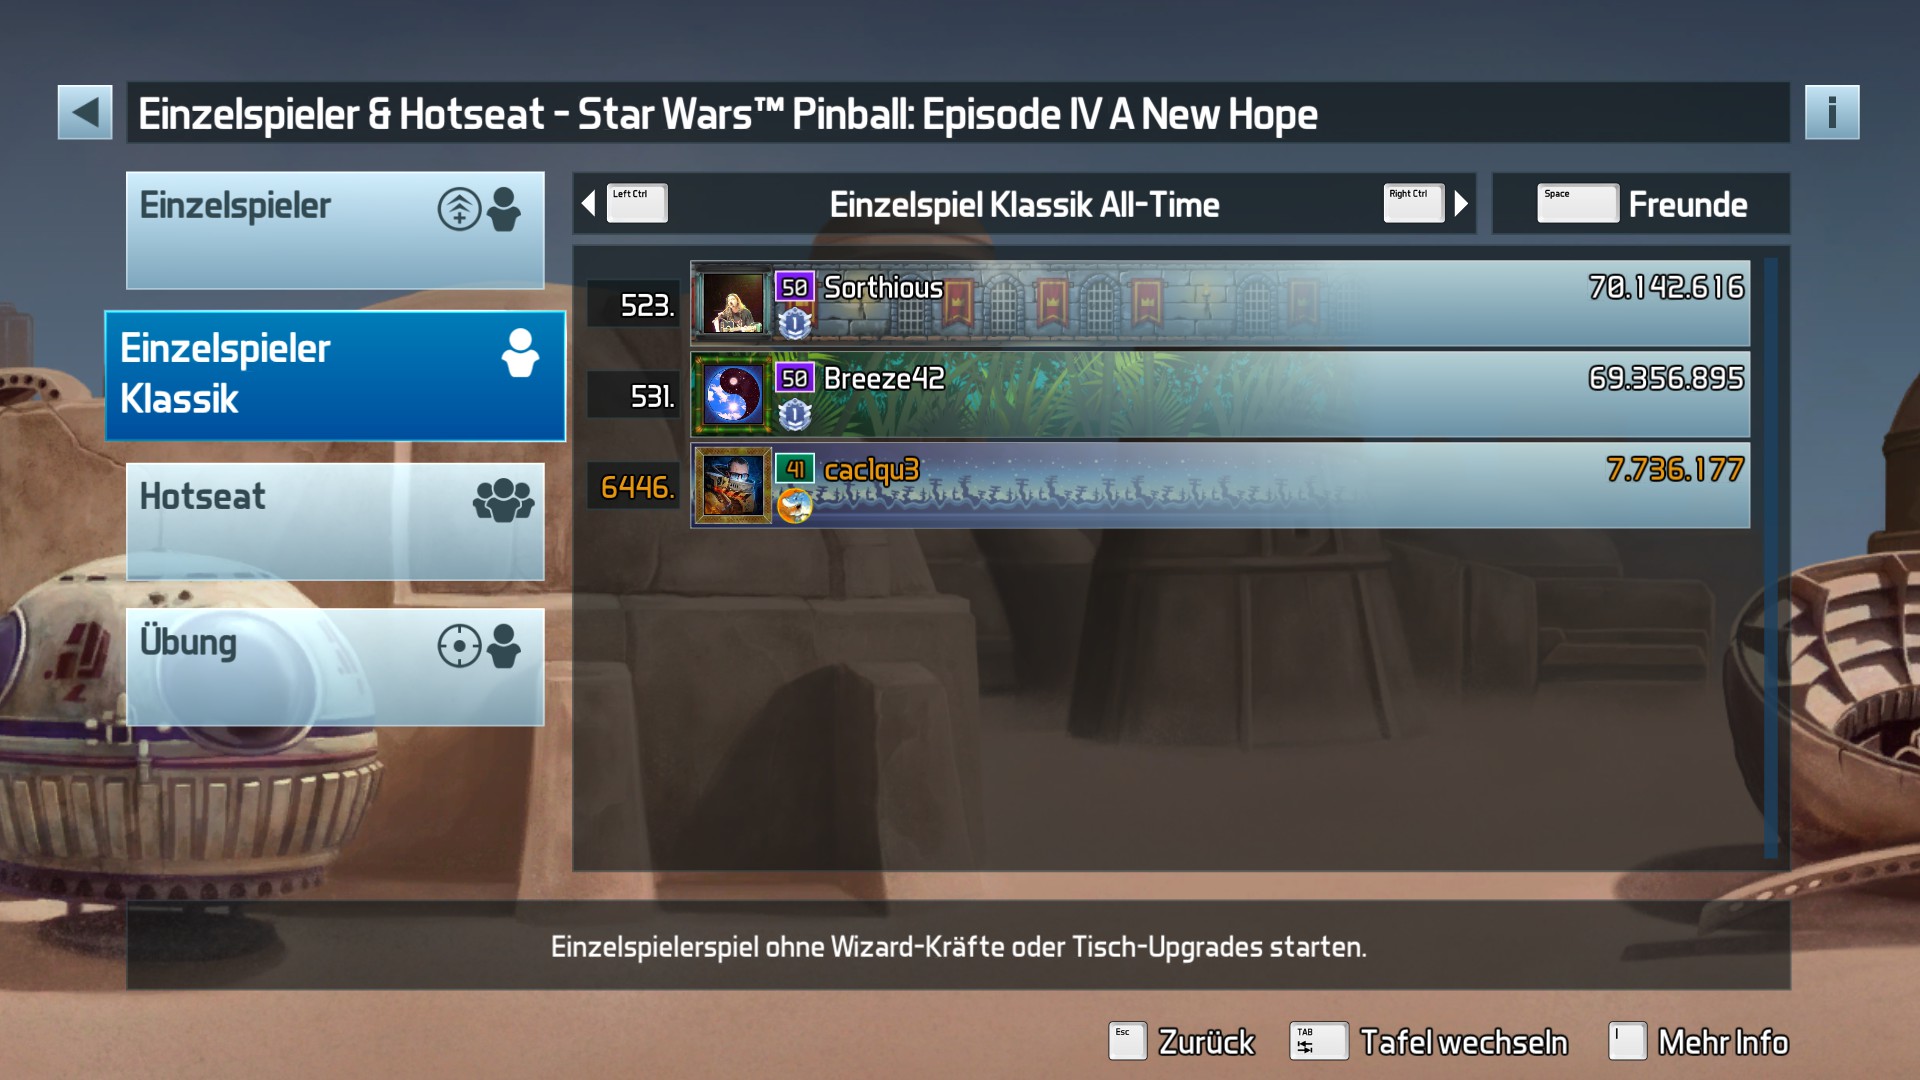 e2e4: Pinball FX3: Star Wars Pinball: Episode IV A New Hope [Classic] (PC) 7,736,177 points on 2022-05-19 06:48:25